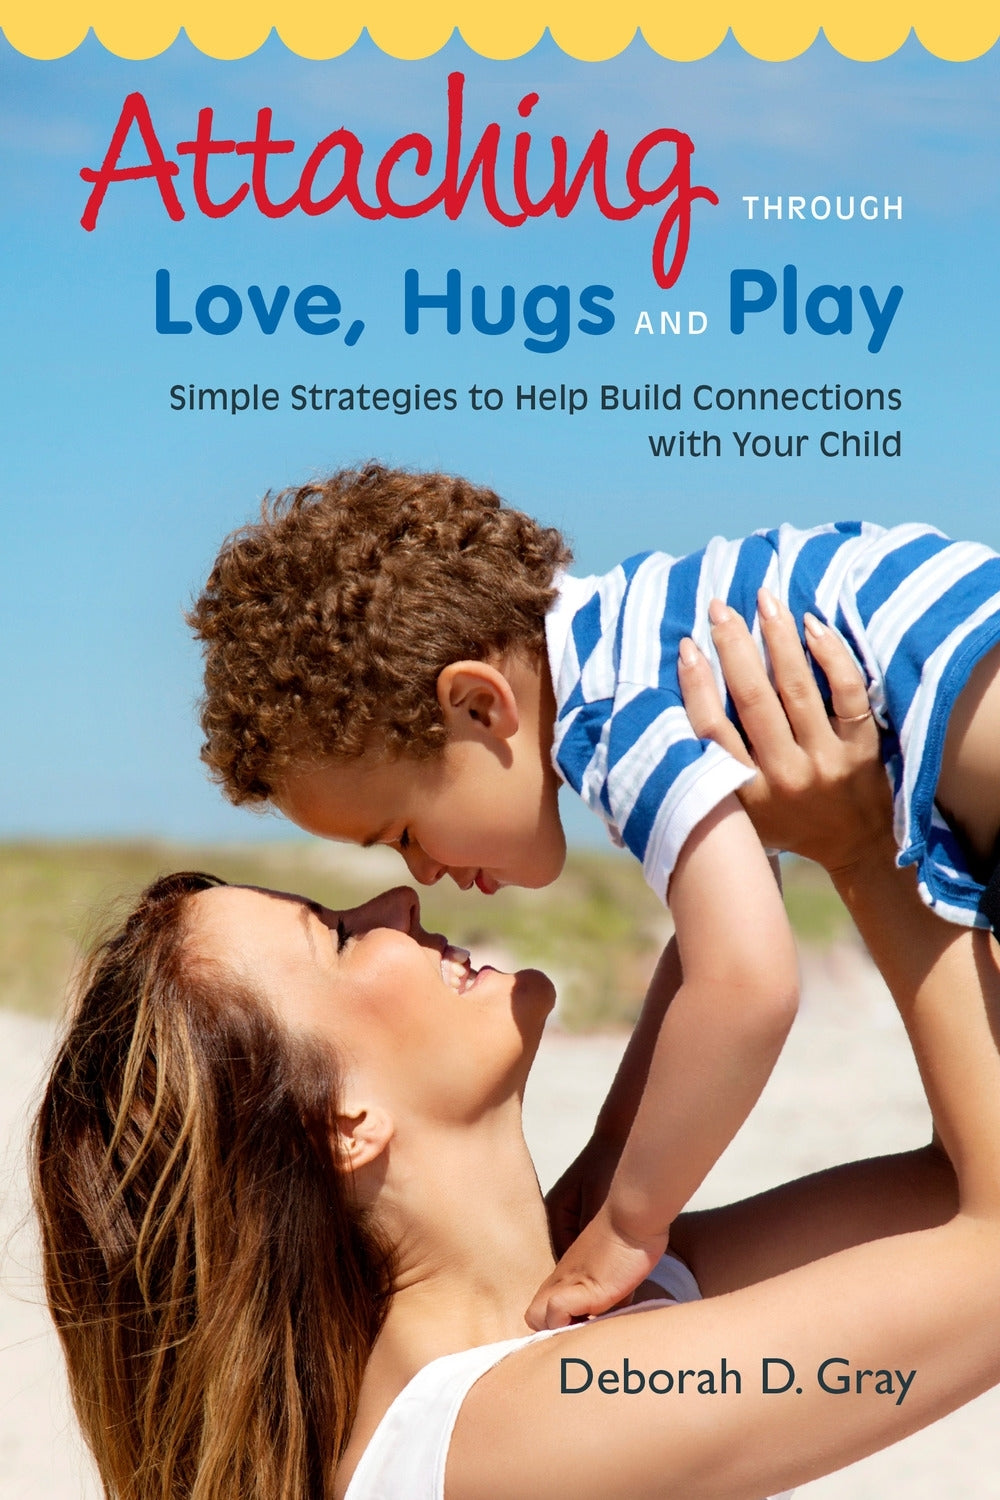 Attaching Through Love, Hugs and Play by Deborah D. Gray